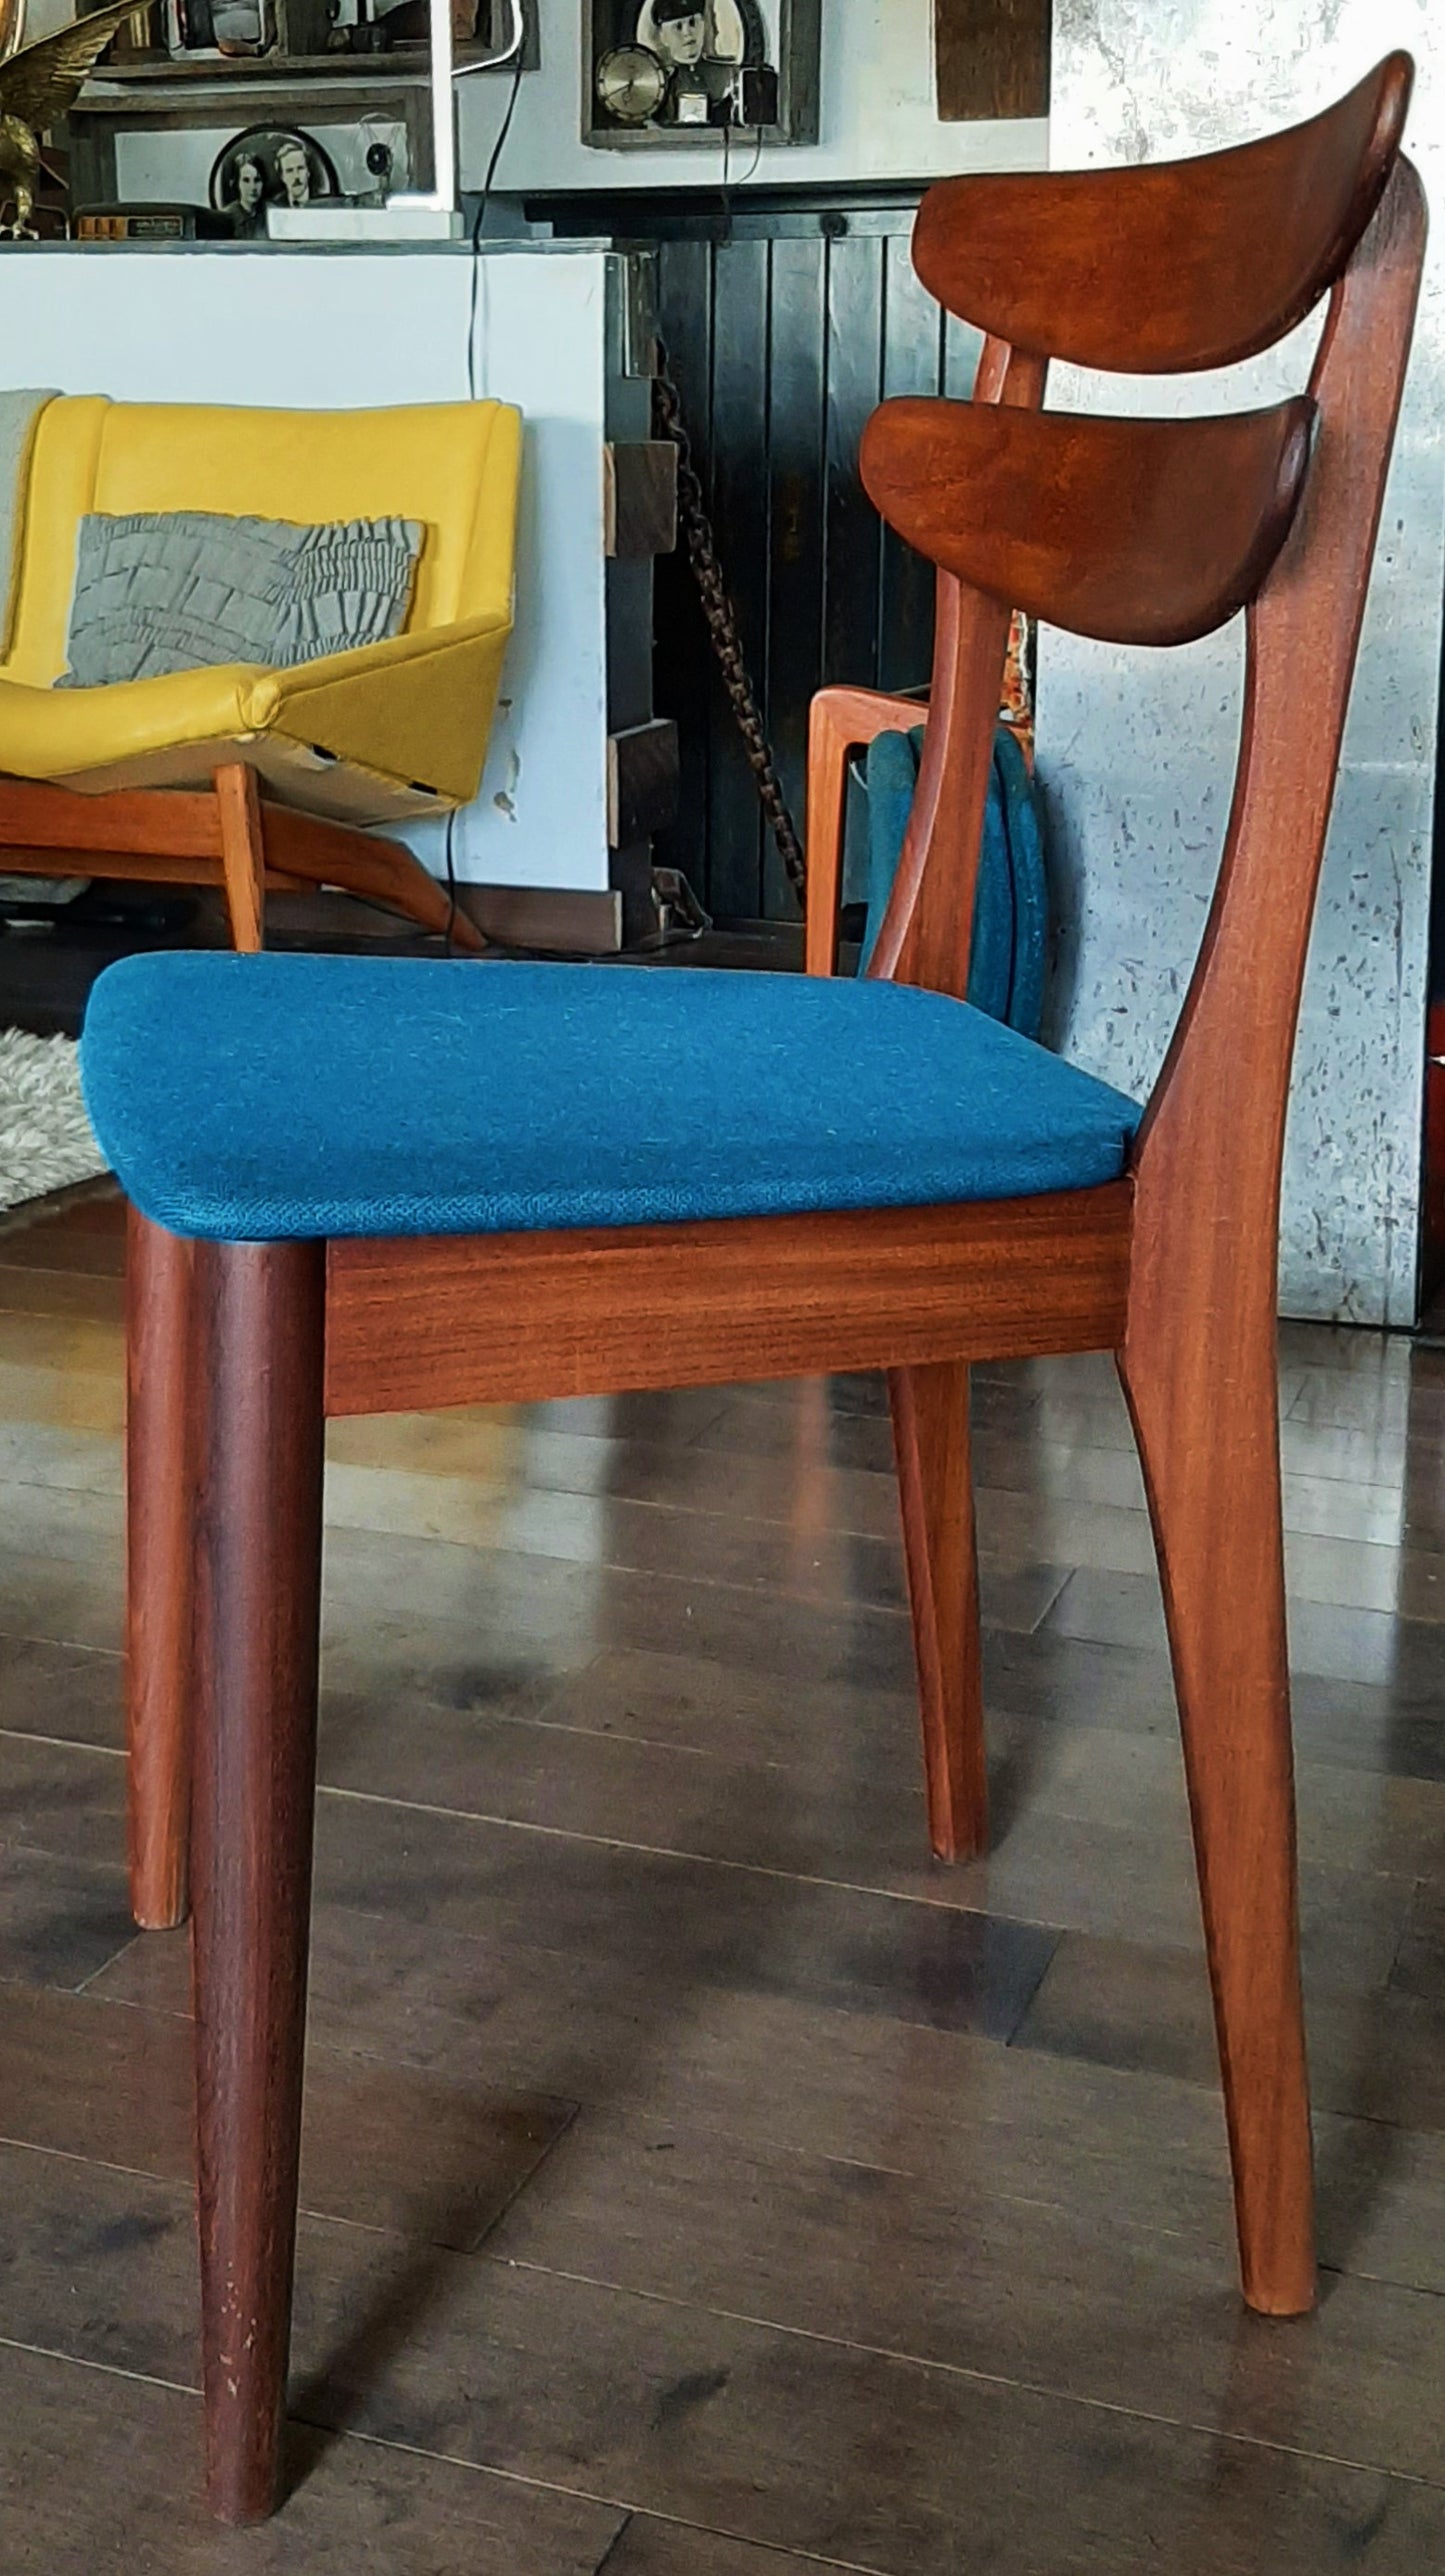 Single REFINISHED will be REUPHOLSTERED Mid Century Modern Solid Teak Chair